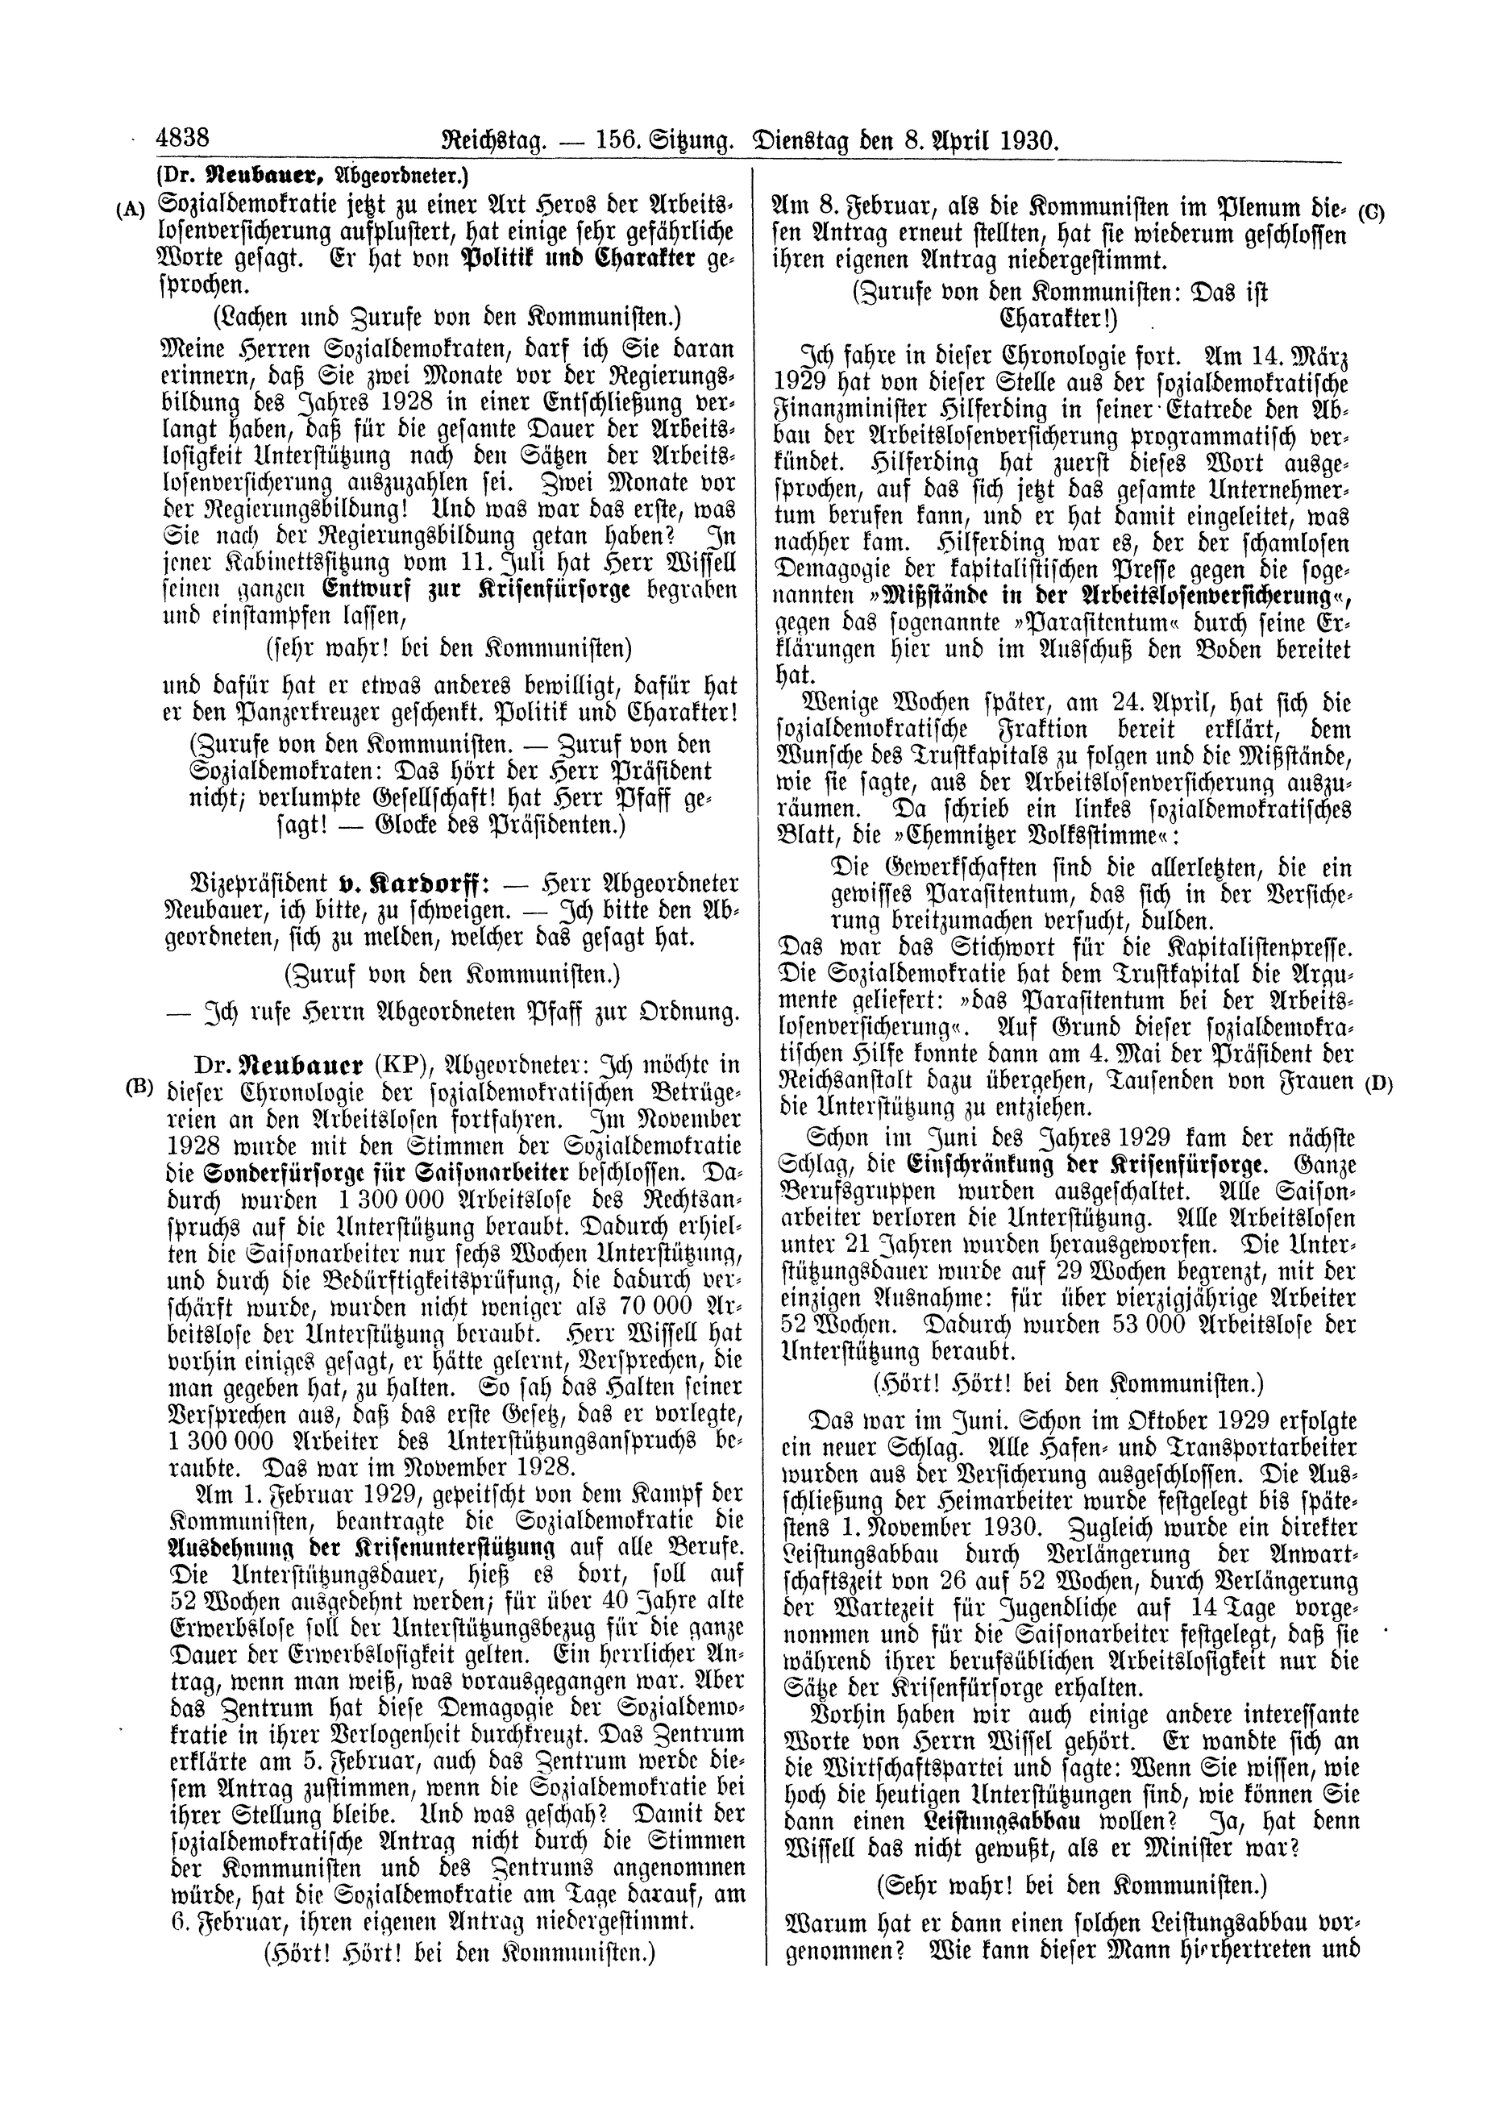 Scan of page 4838